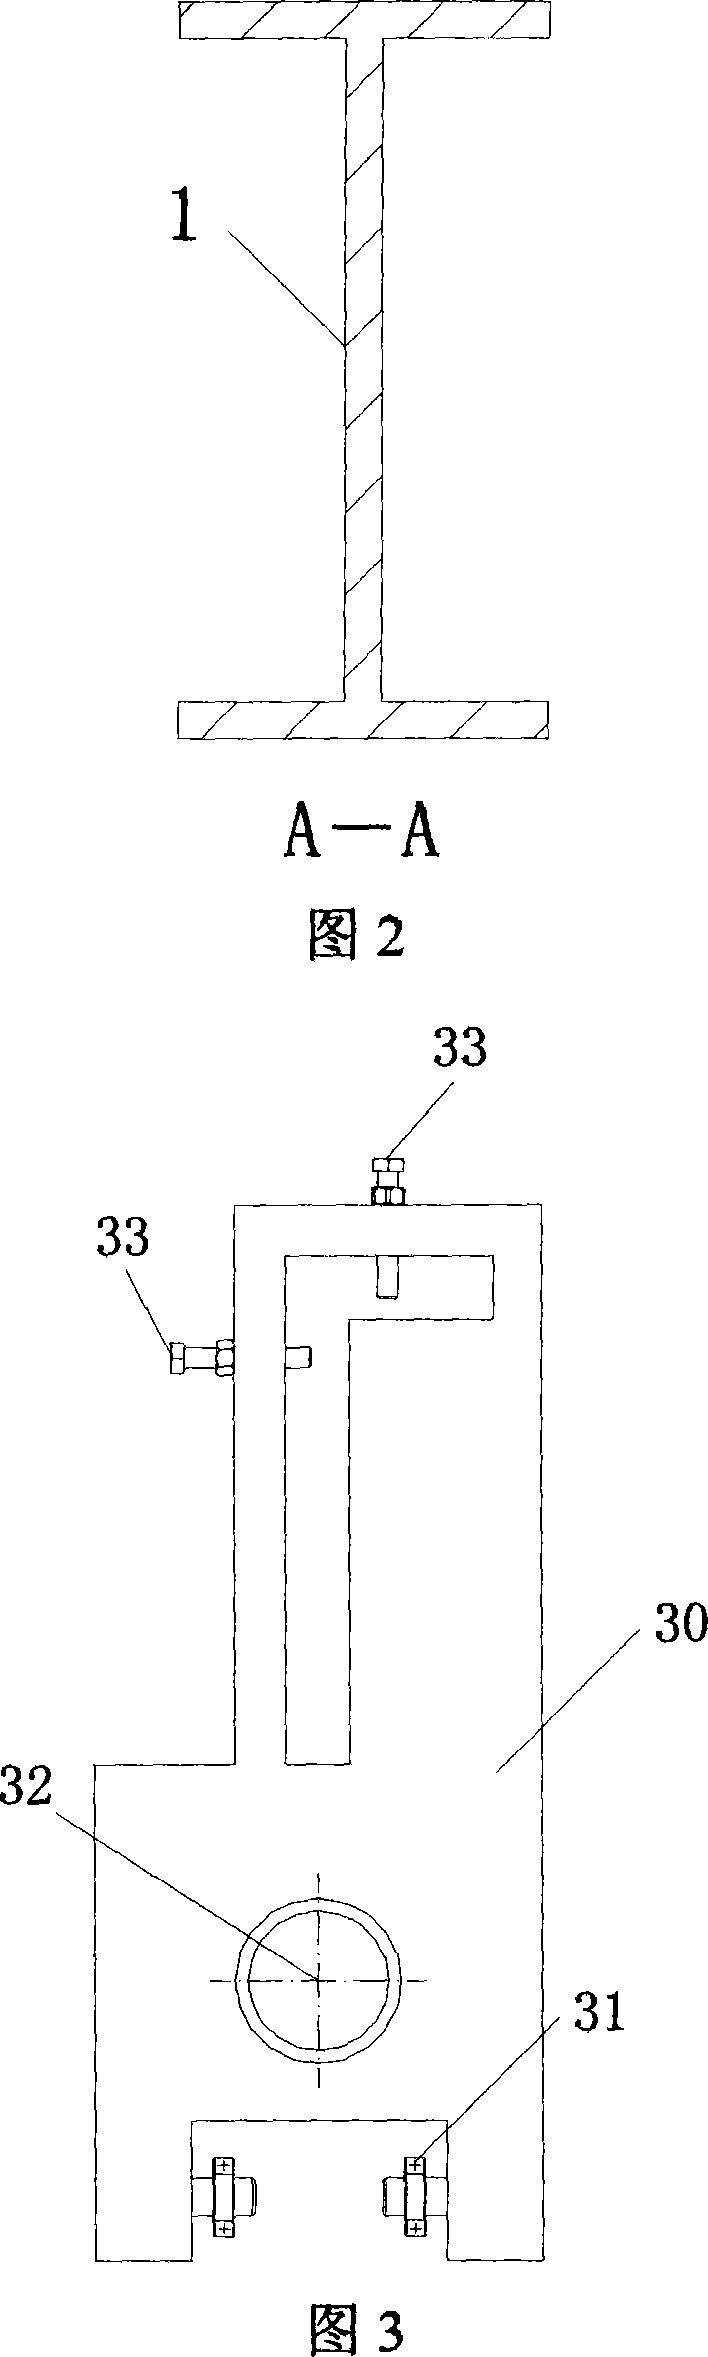 Method for forming edging angle steel connecting oil tank vault and wall plate and special-purpose equipment